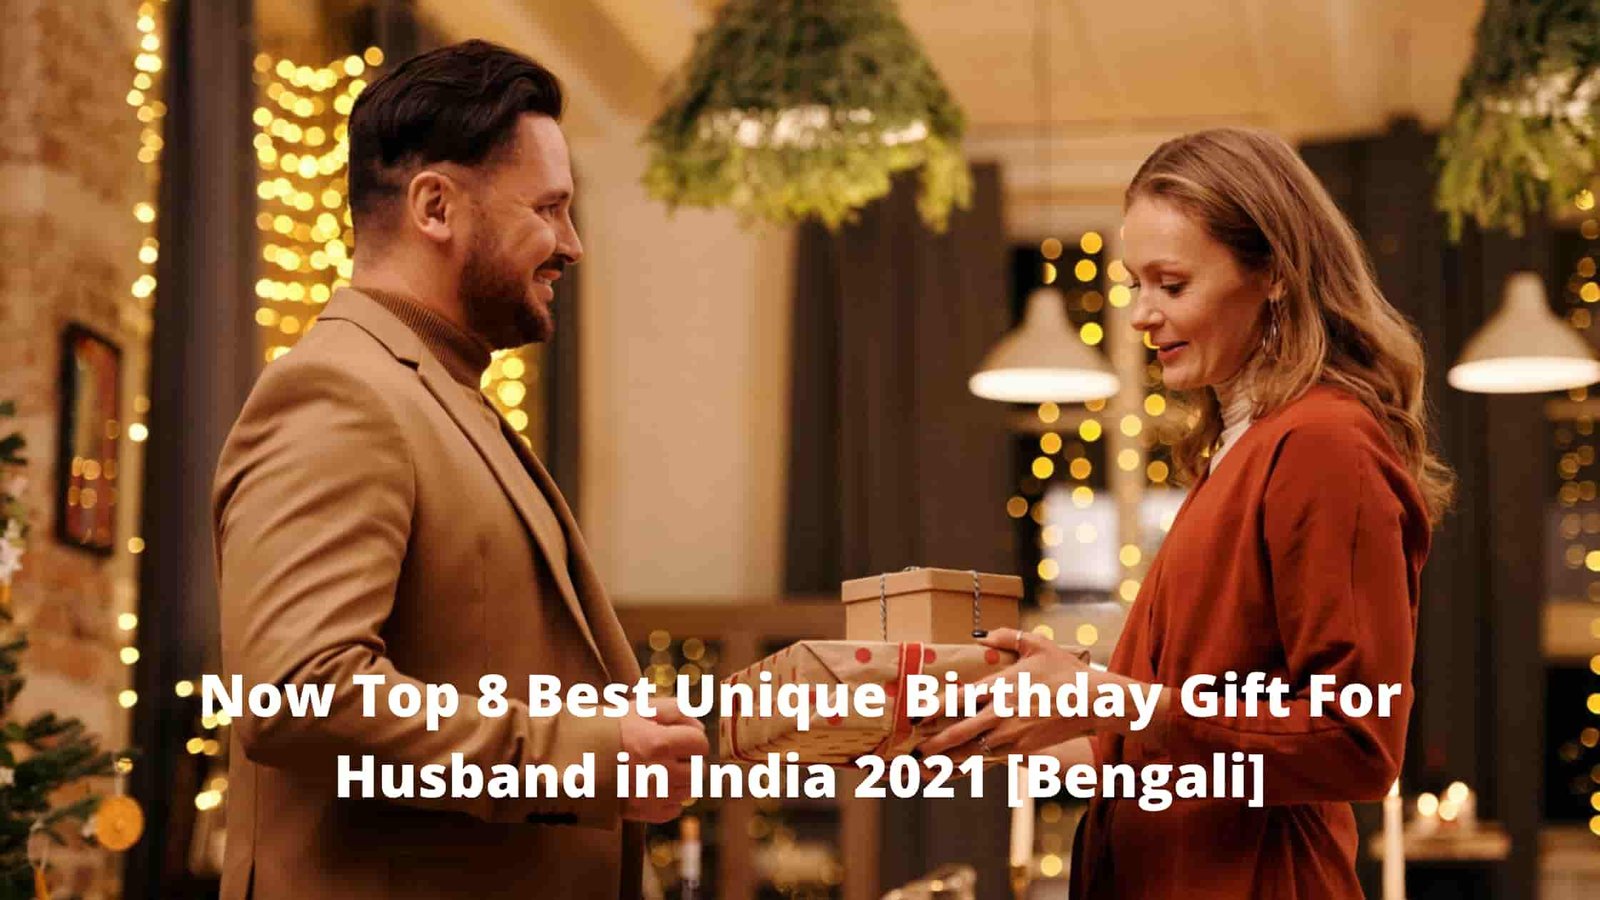 Now Top 8 Best Unique Birthday Gift For Husband in India 2021 [Bengali]